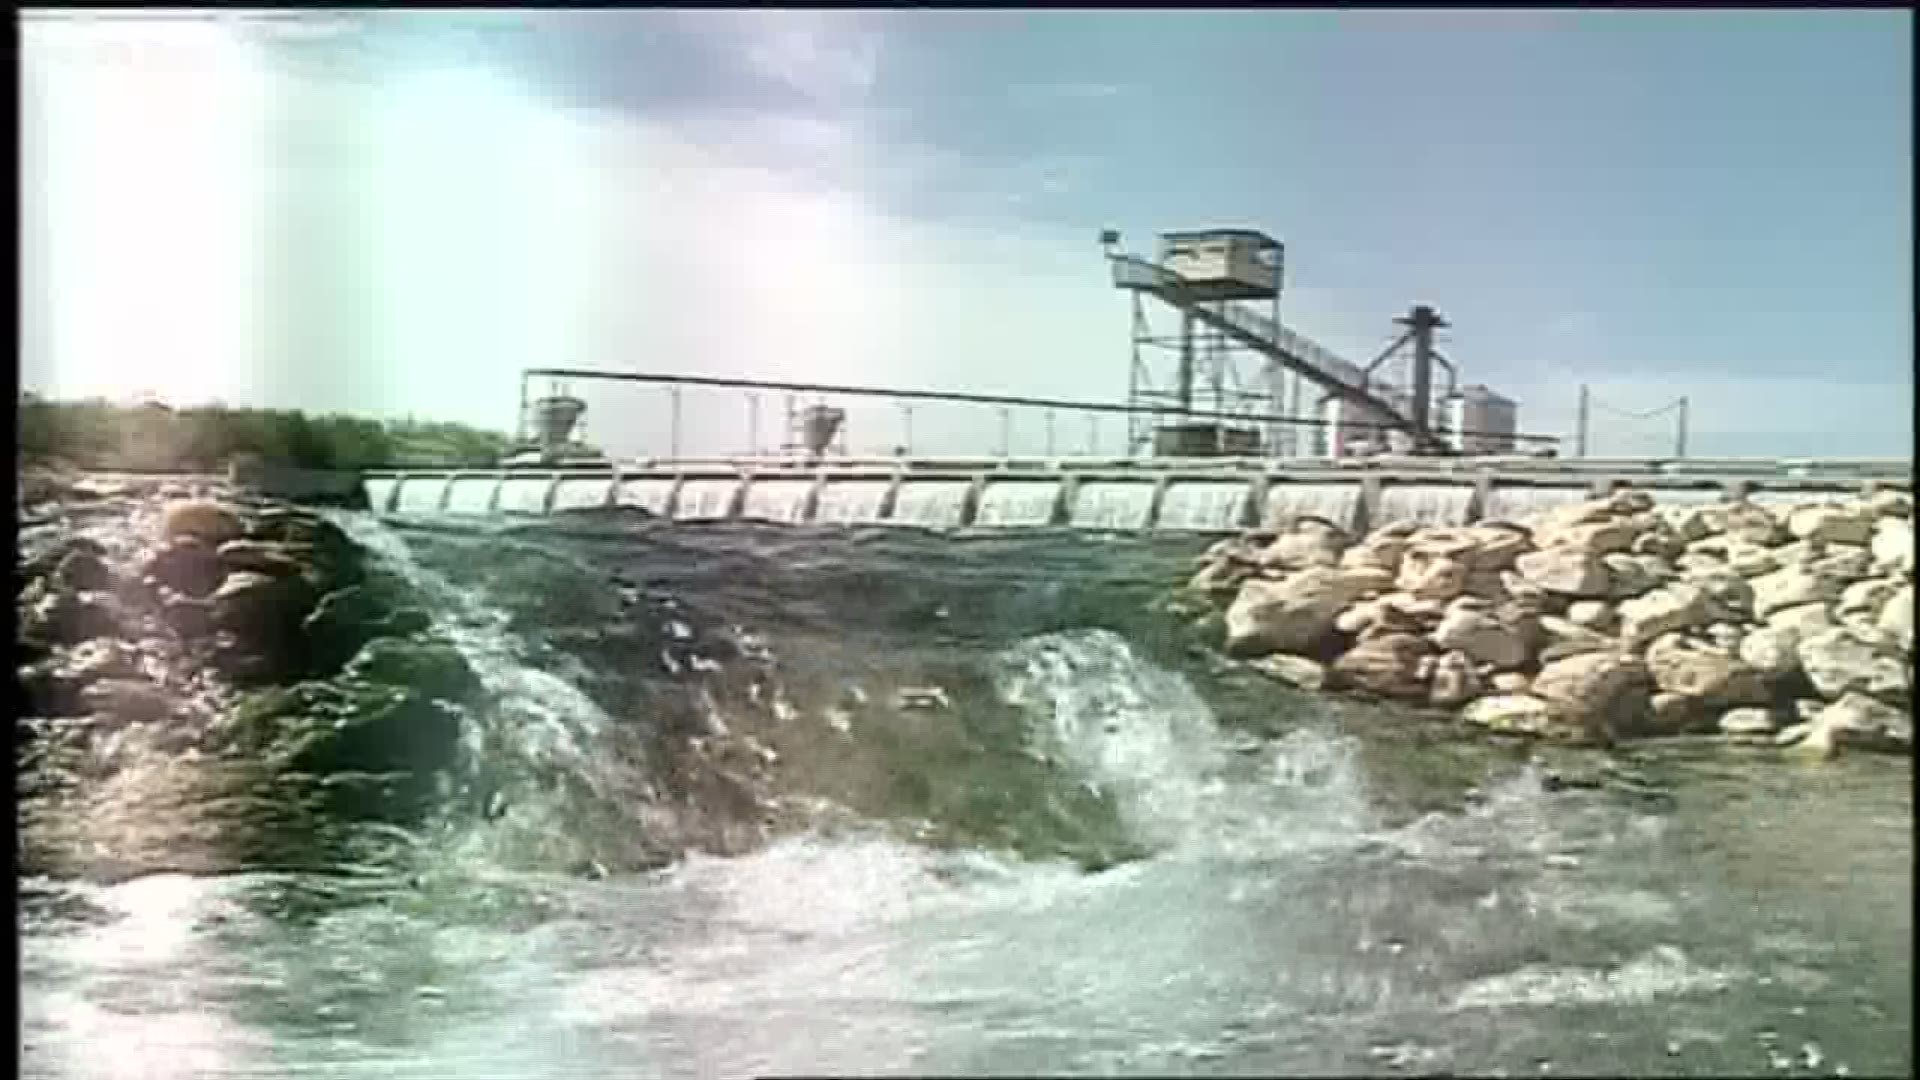 Many San Antonioans remember the Living Water Artesian Springs catfish farm from the early 90s that pumped millions of gallons from the Edwards Aquifer. The battle for the rights to that water changed laws and access to San Antonio's water supply. Eyewitn